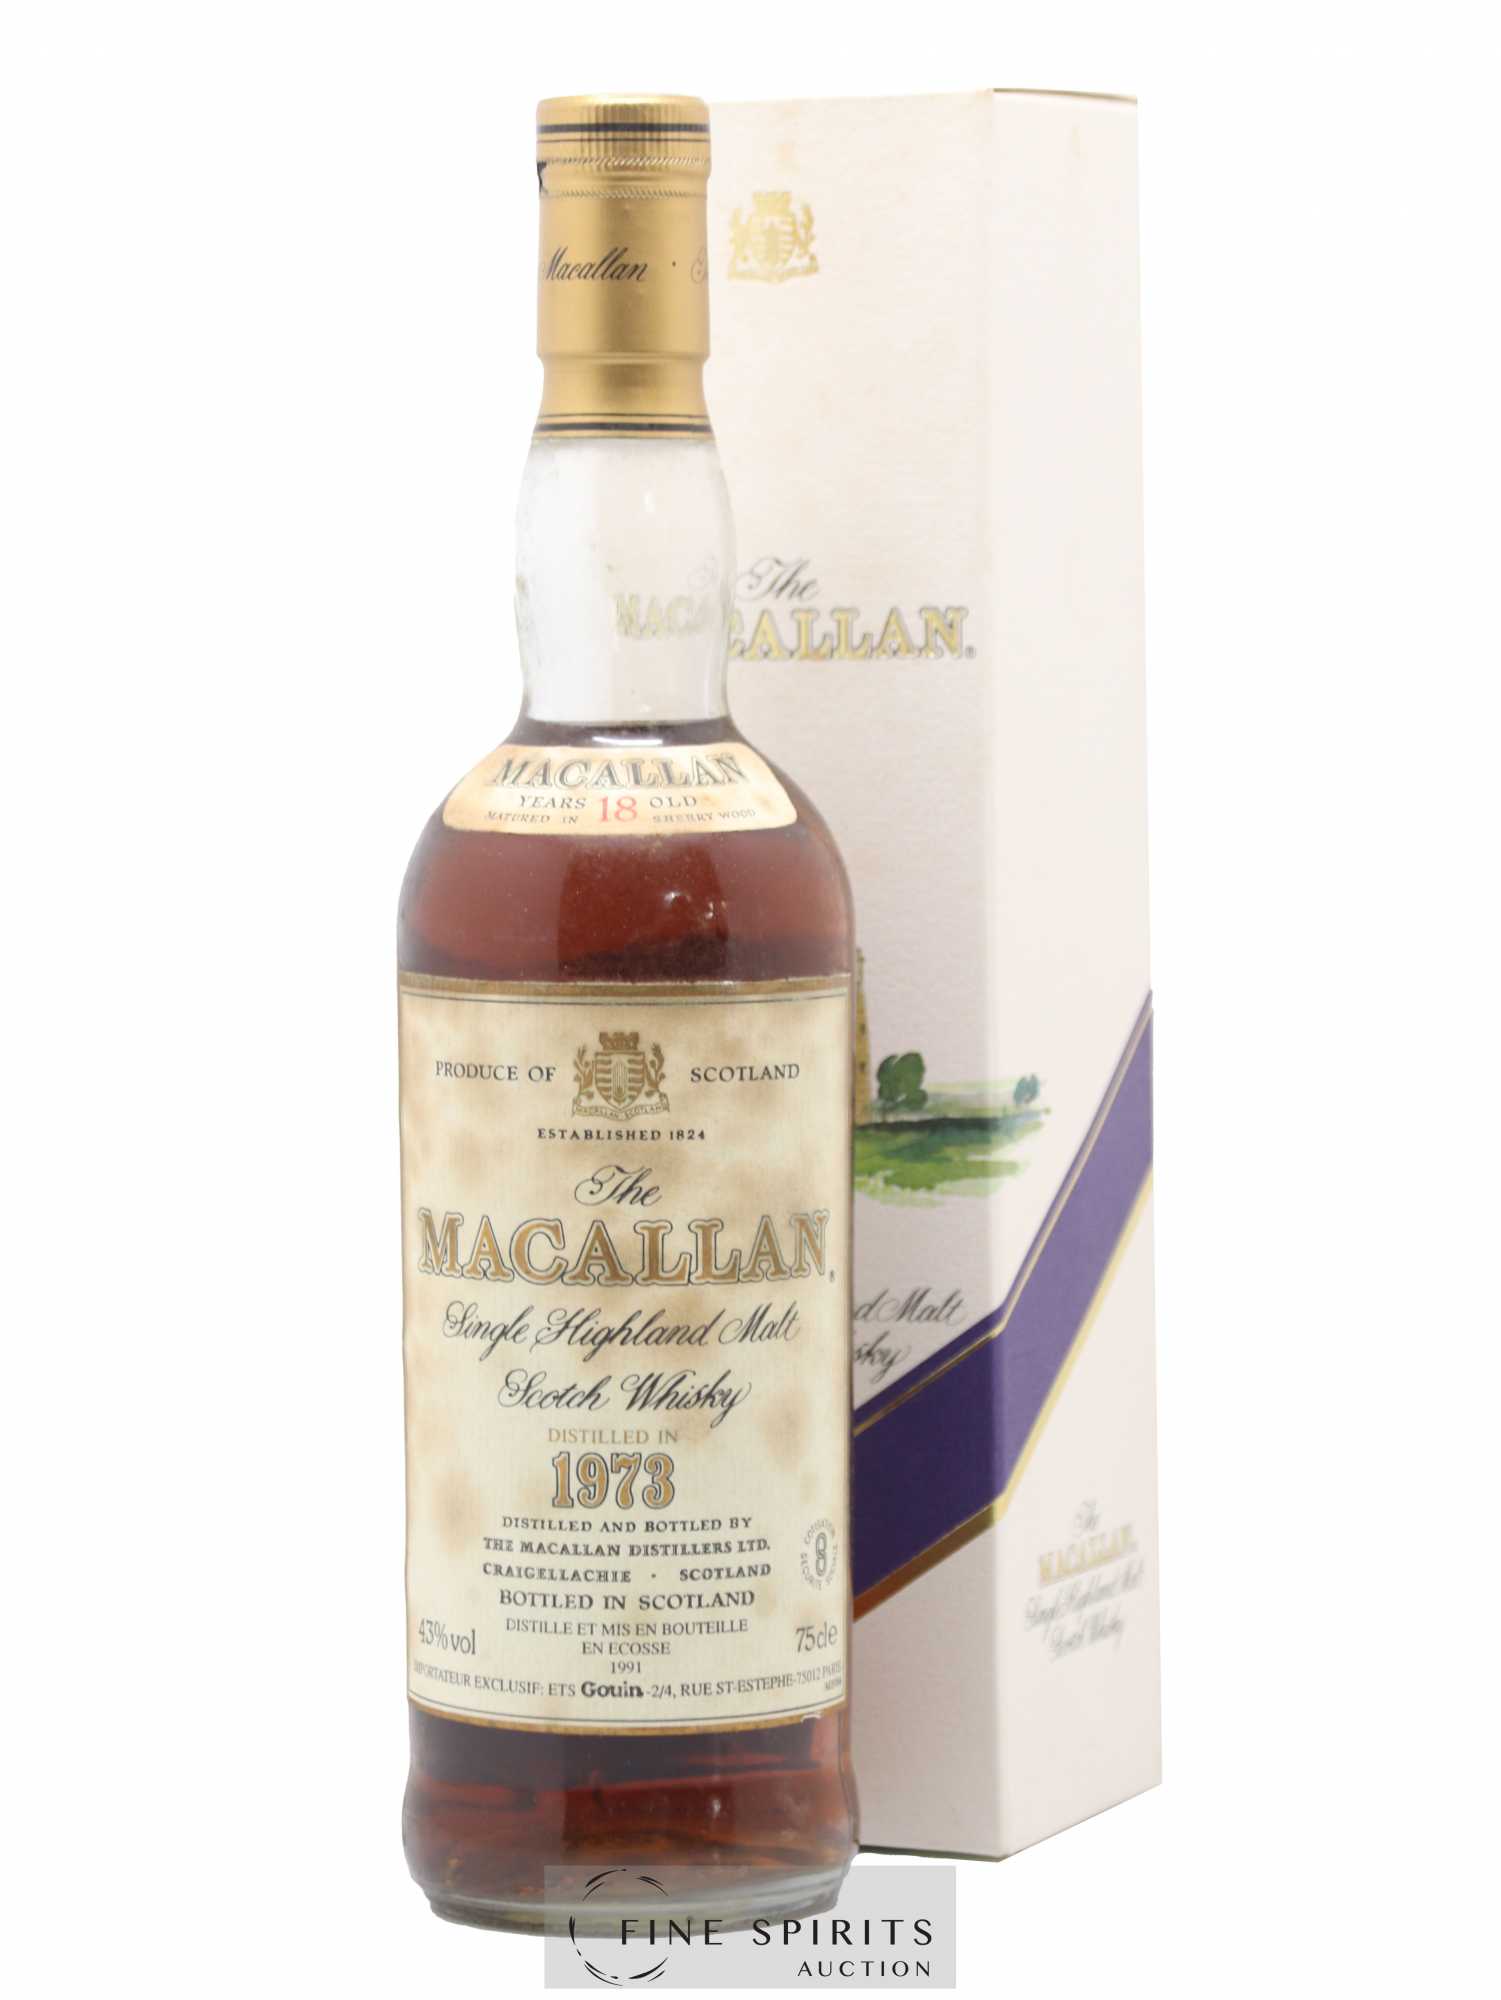 Macallan (The) 18 years 1973 Of. Sherry Wood Matured - bottled 1991 Gouin Import 